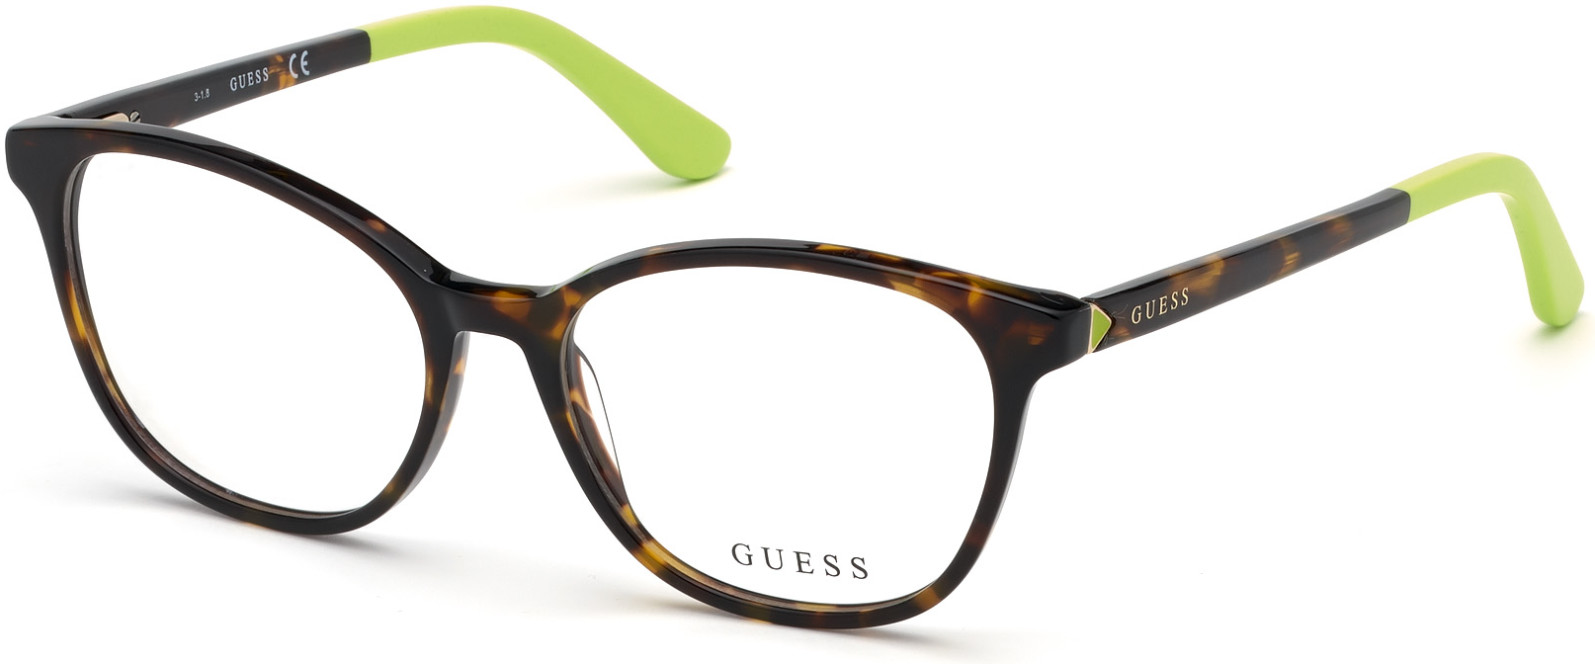 GUESS 2698